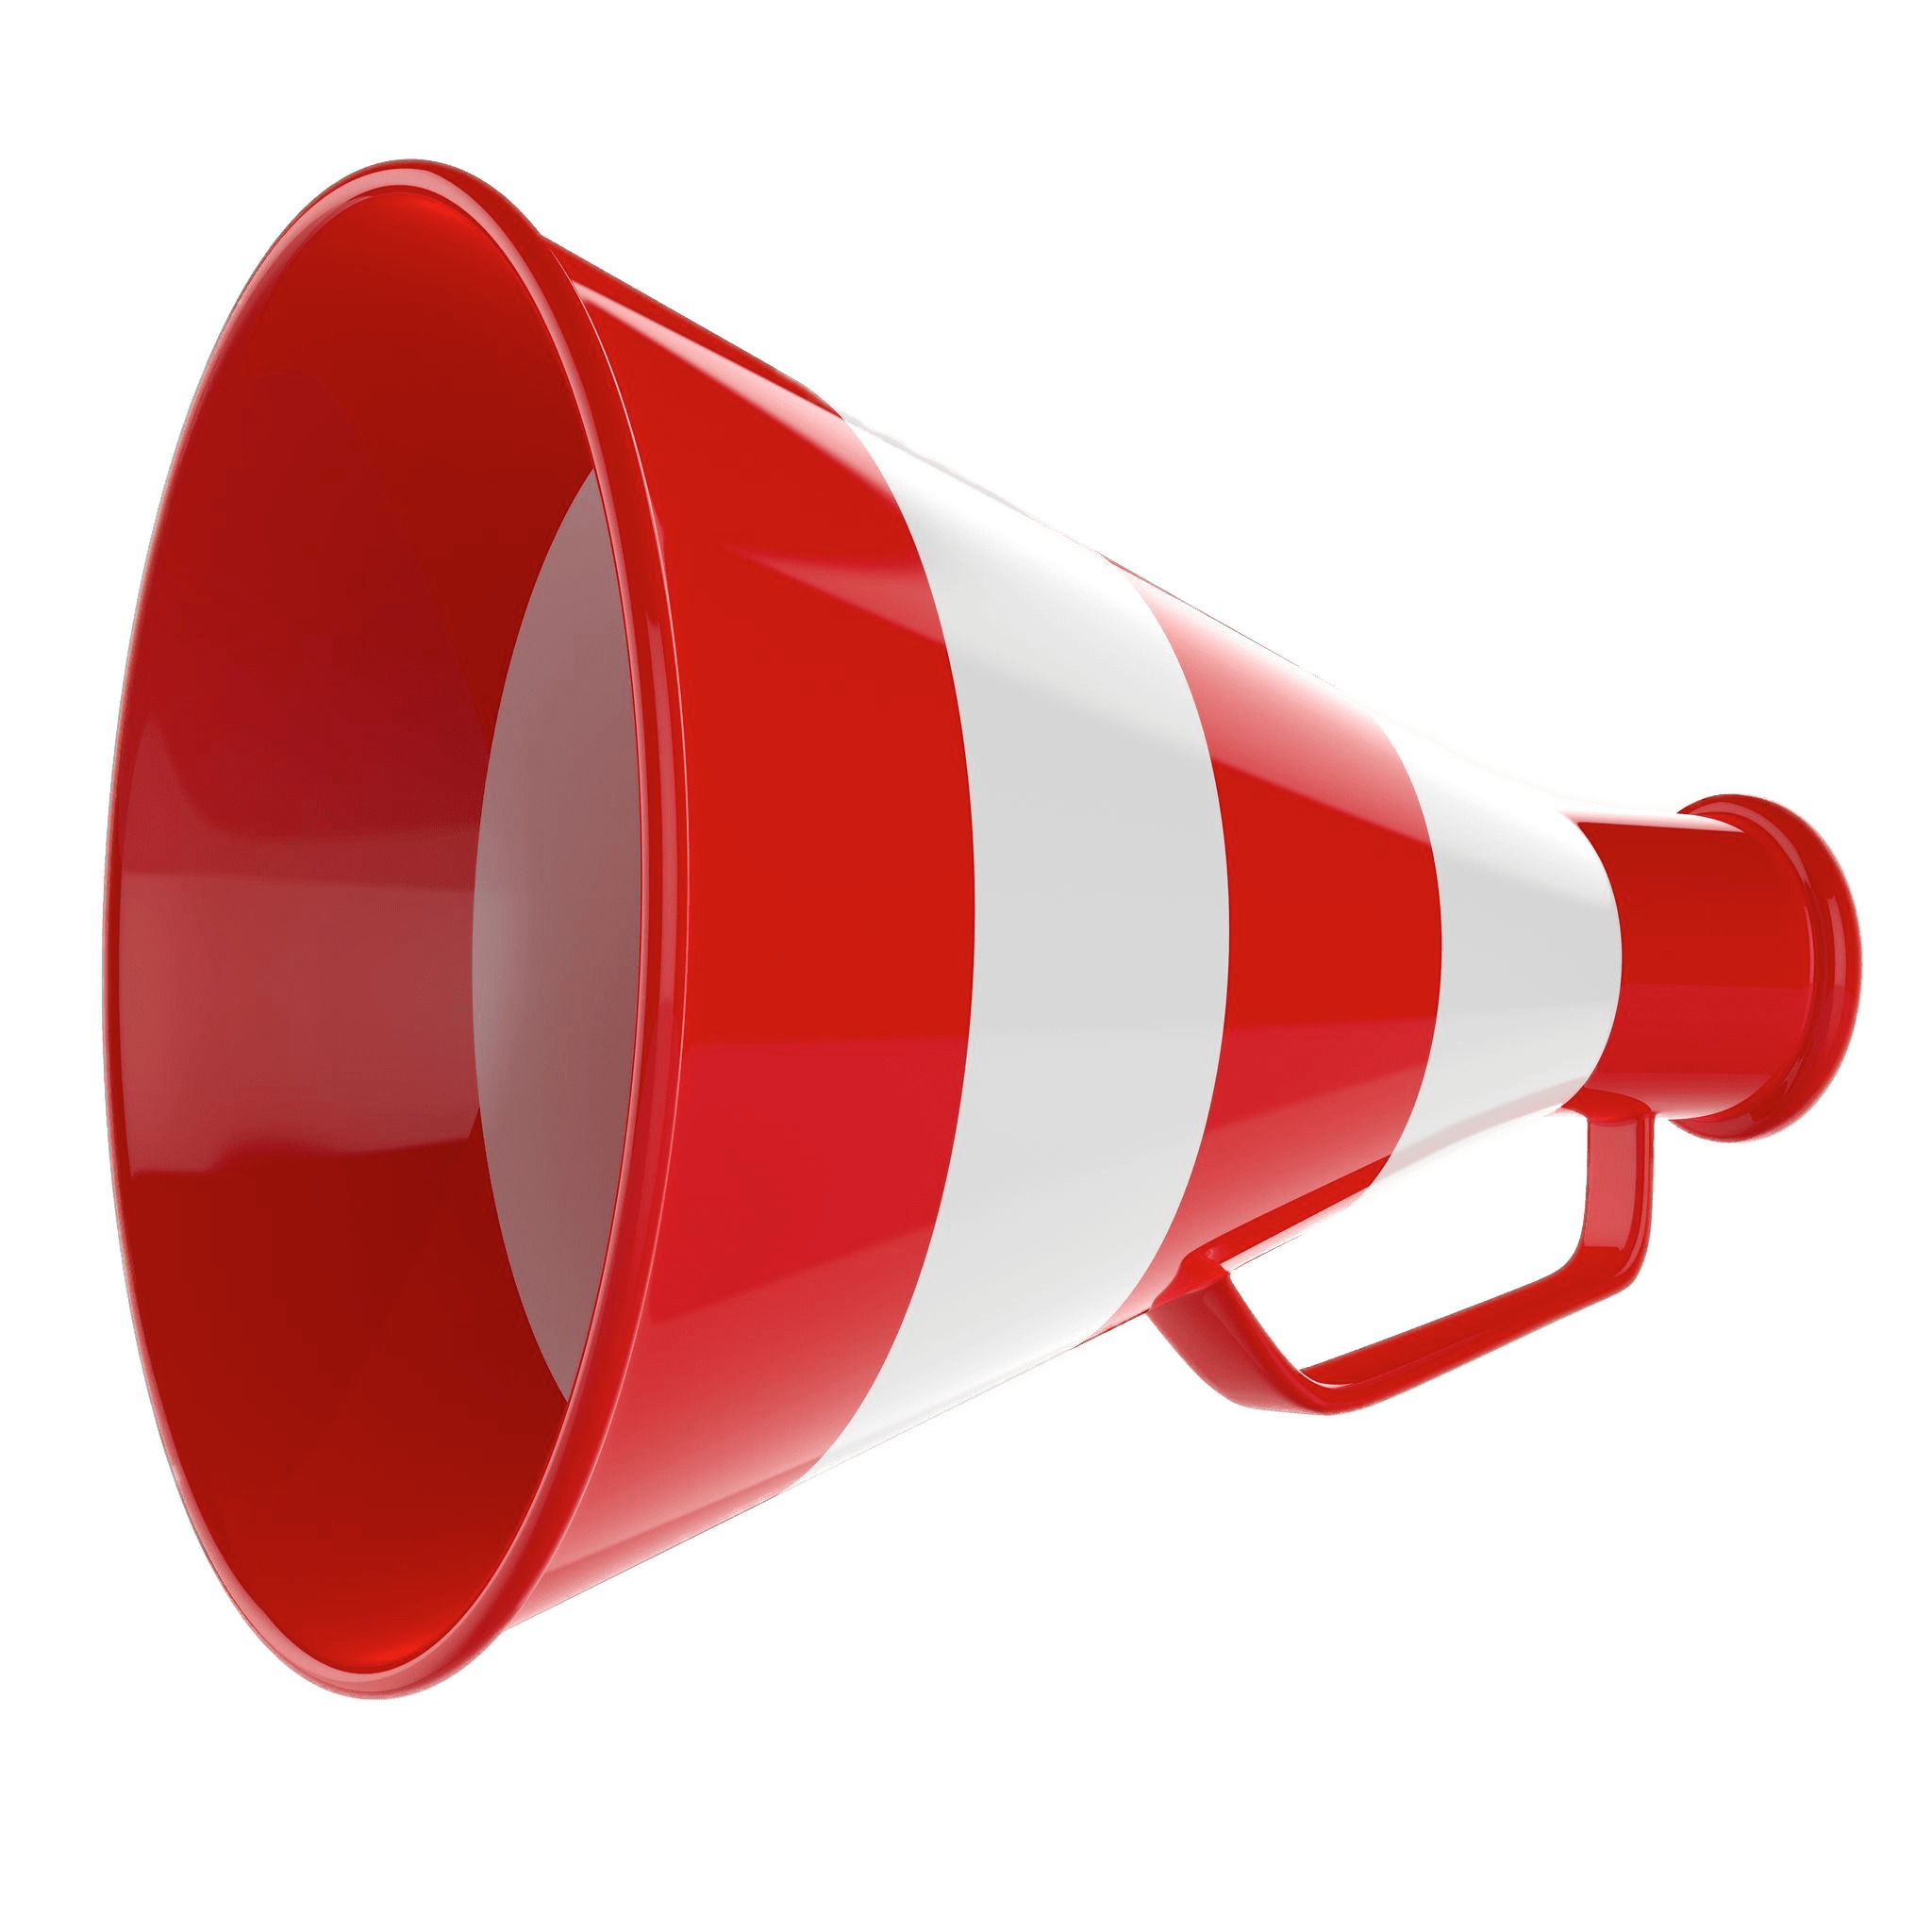 Red and White Striped Megaphone icons